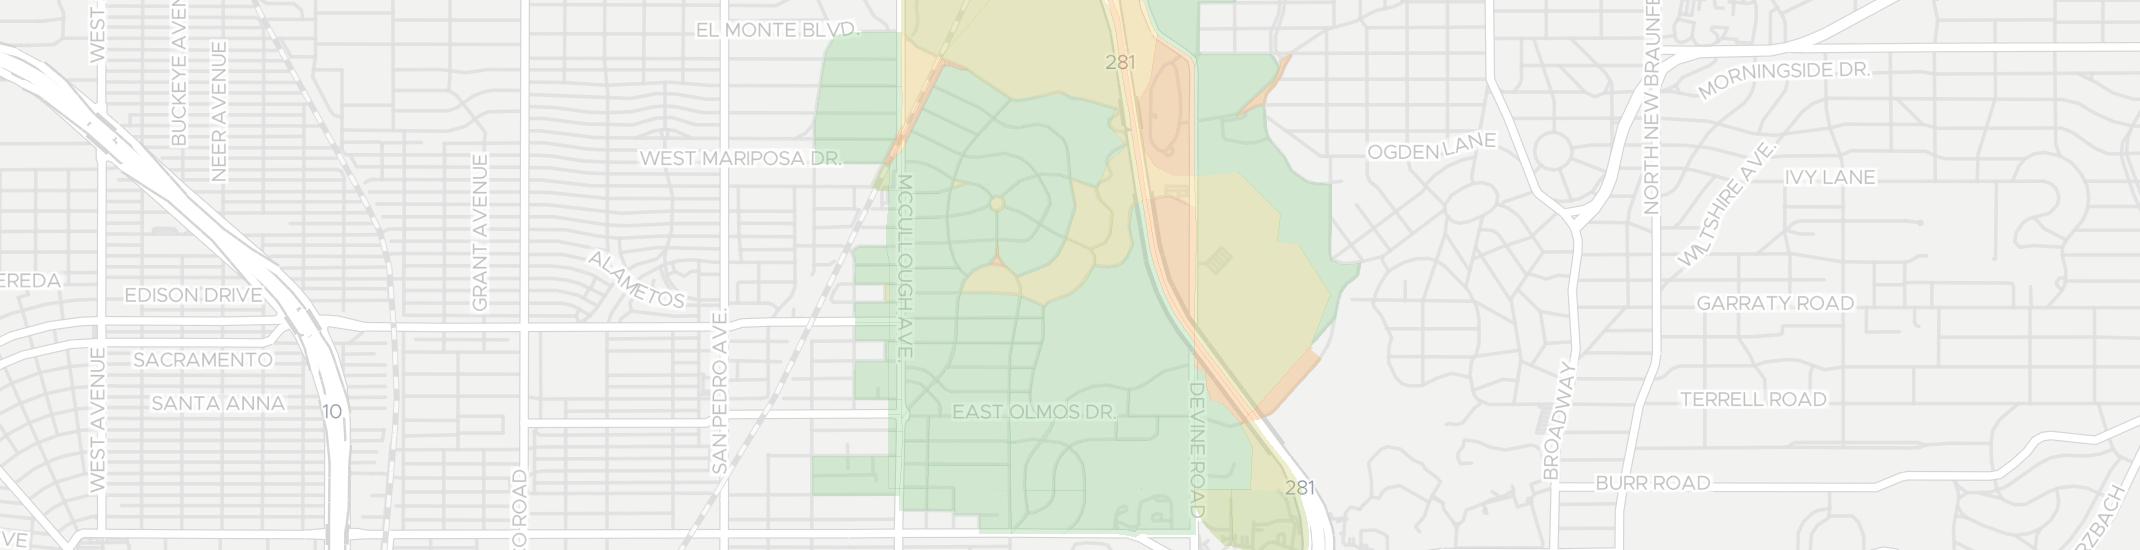 Olmos Park Internet Competition Map. Click for interactive map.